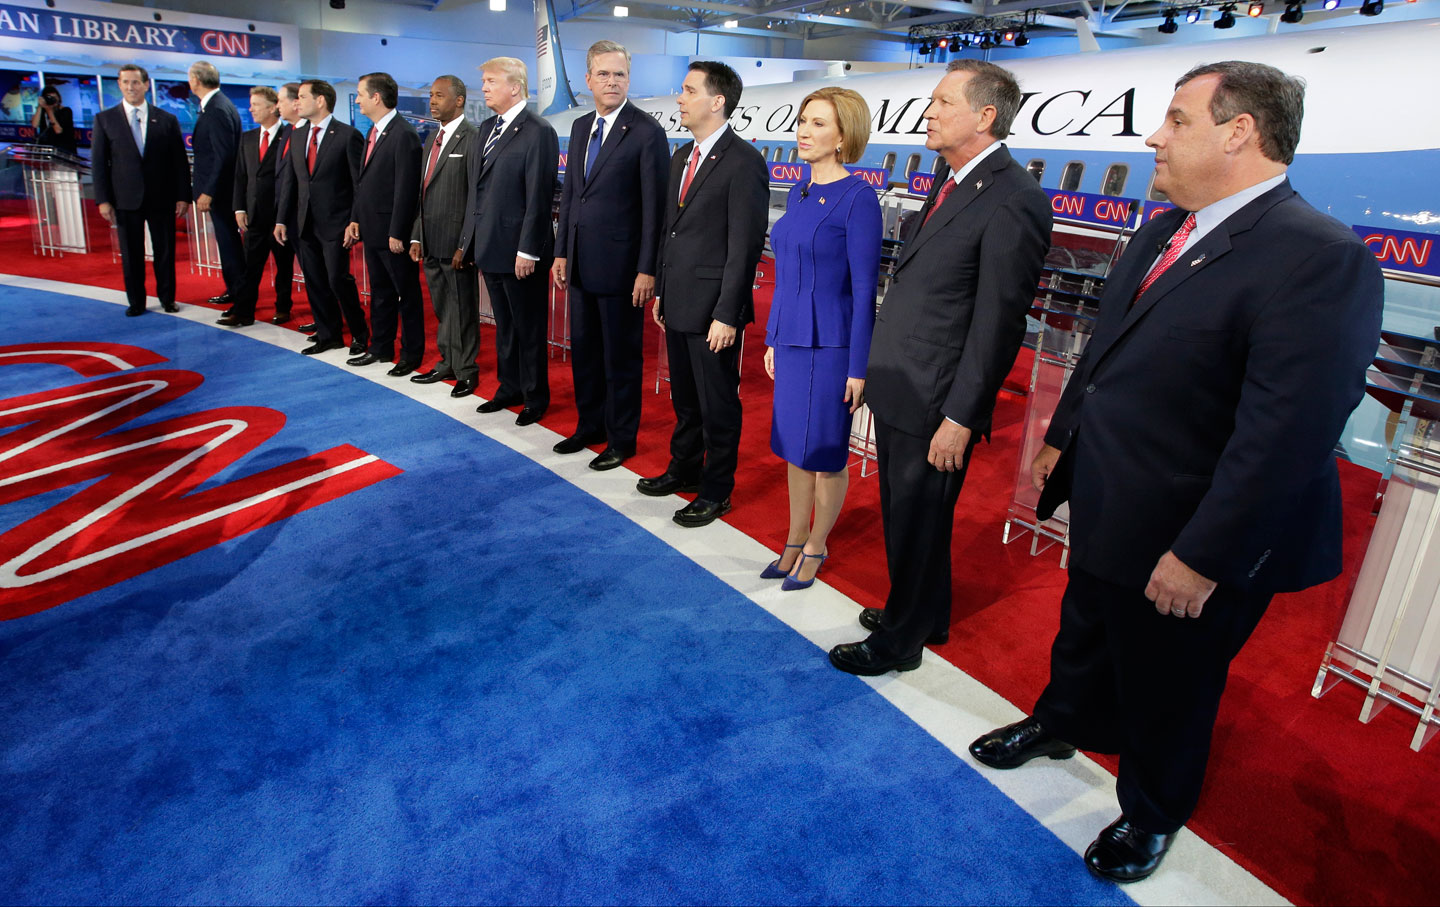 Judging by Last Night’s Debate, the GOP Race Is Only Getting Crazier